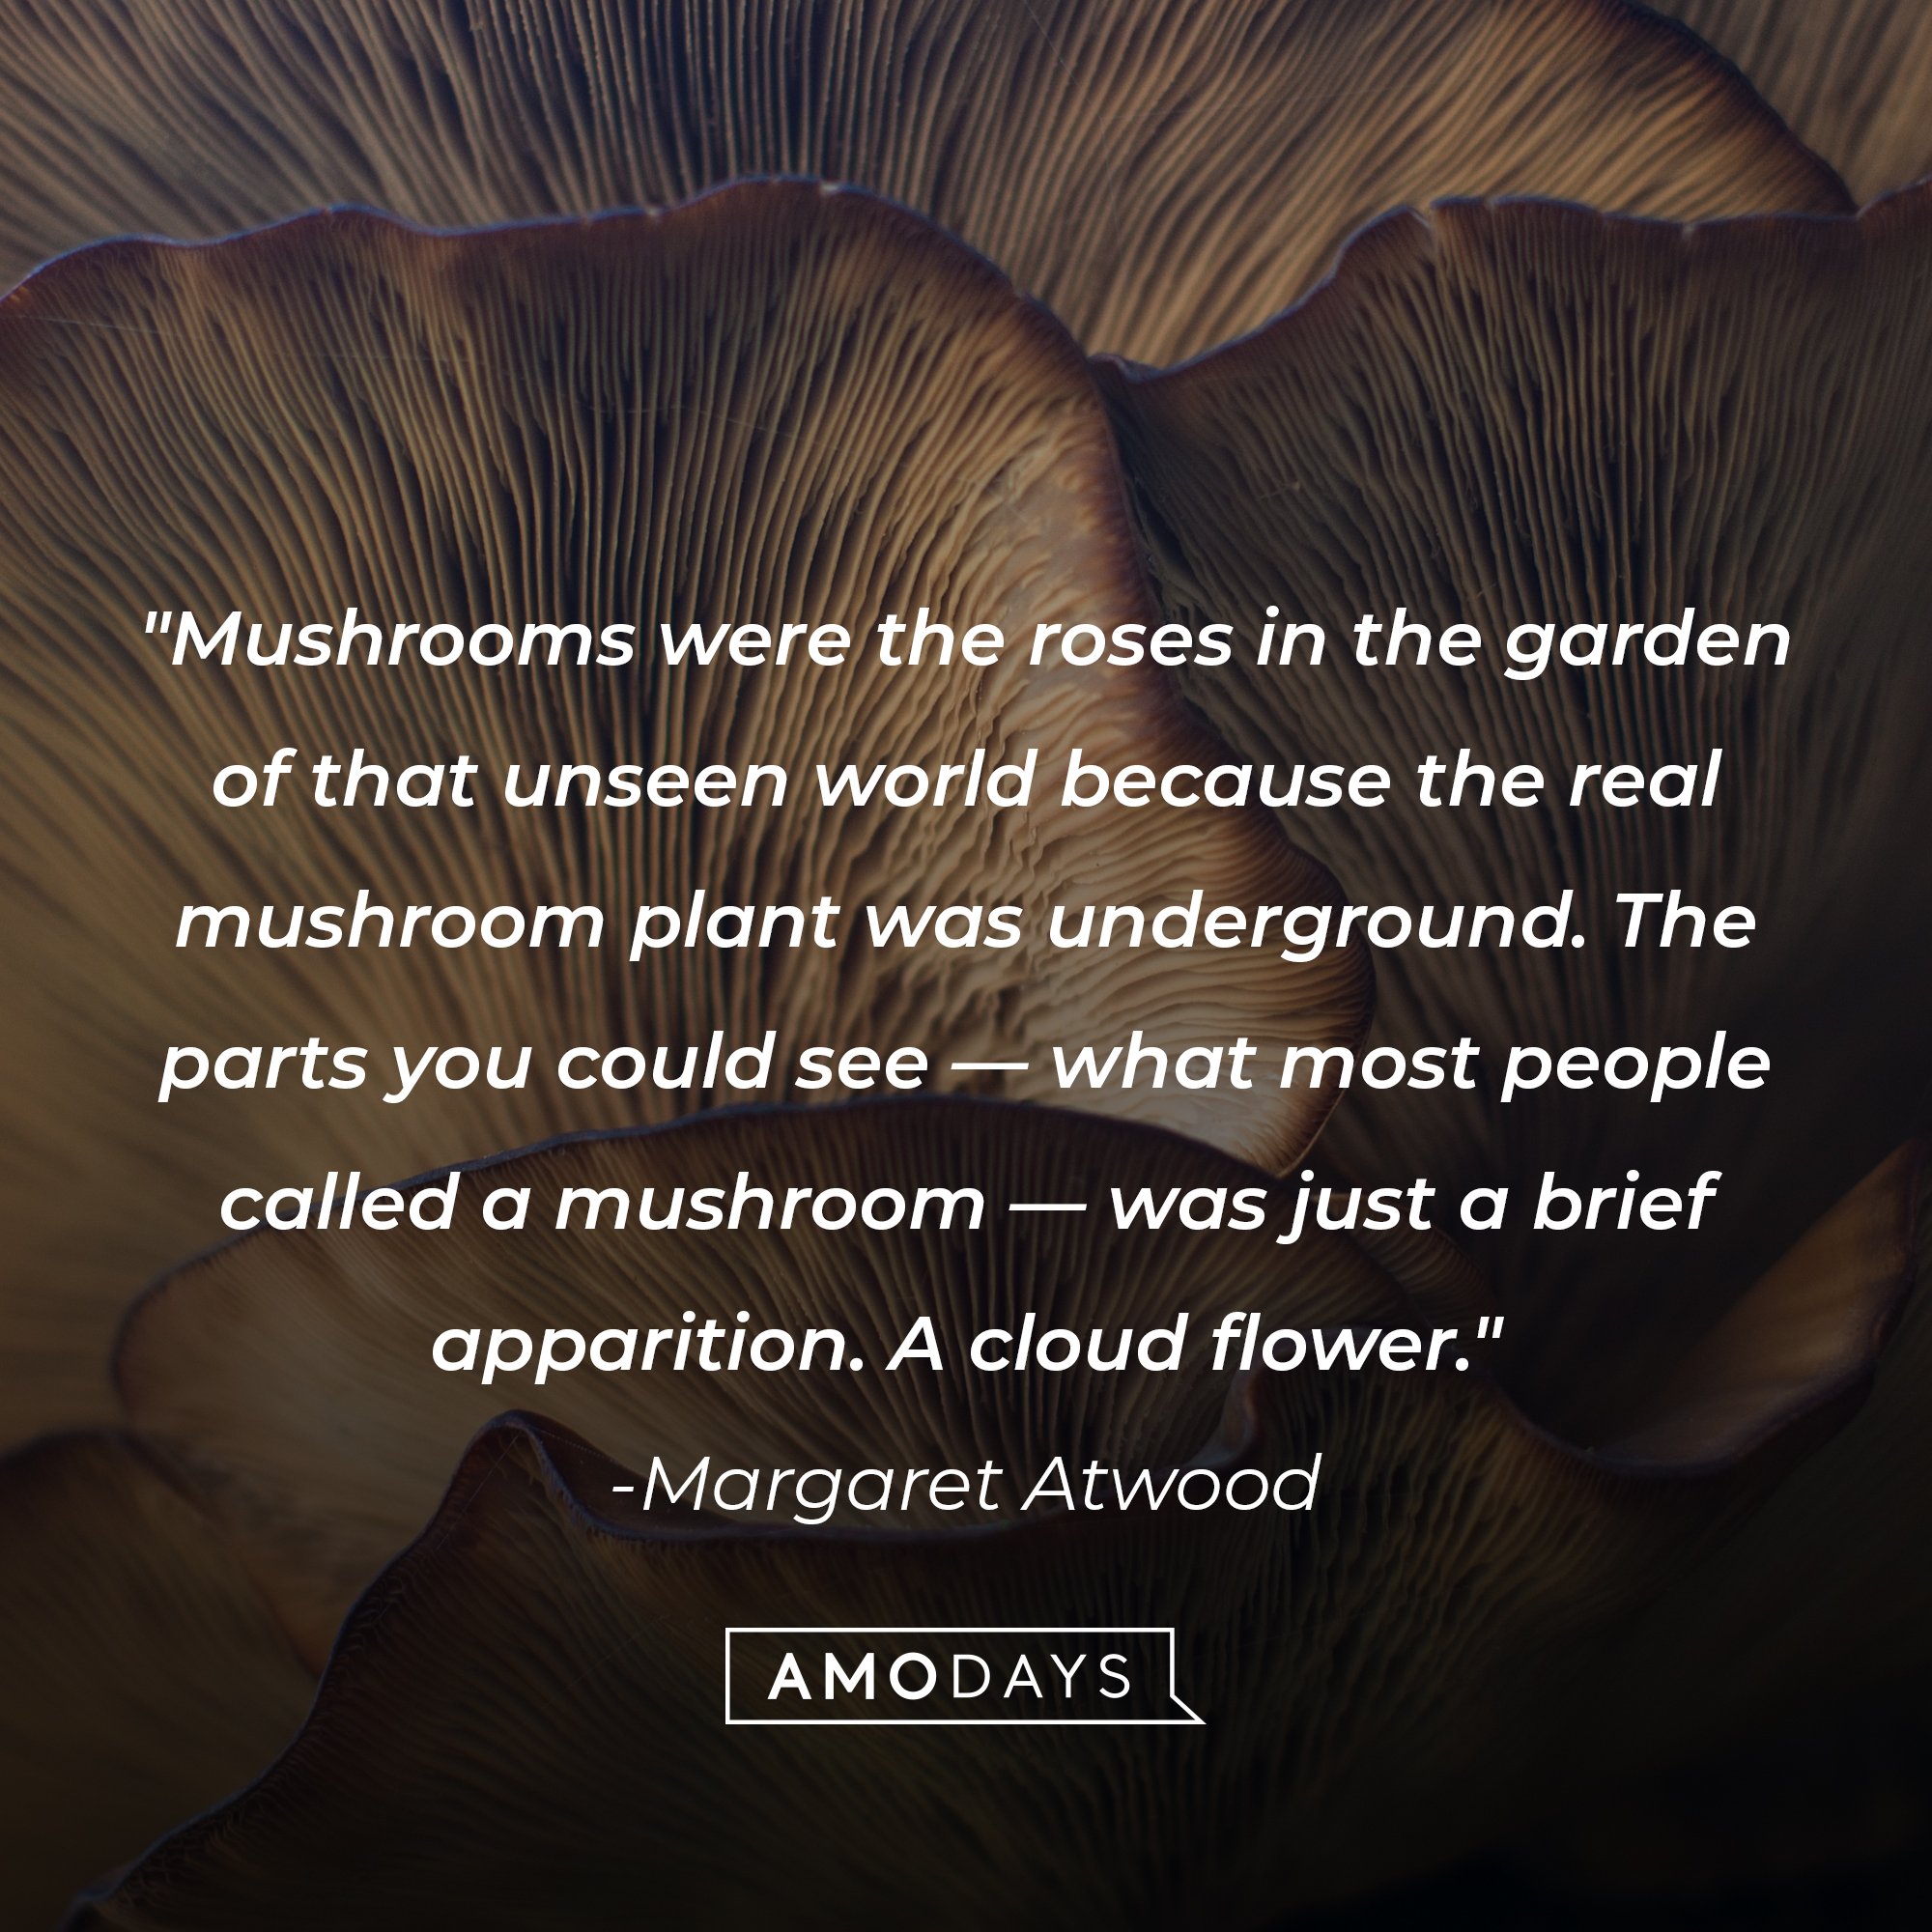  Margaret Atwood’s quote: "Mushrooms were the roses in the garden of that unseen world because the real mushroom plant was underground. The parts you could see —what most people called a mushroom —was just a brief apparition. A cloud flower." | Image: AmoDays